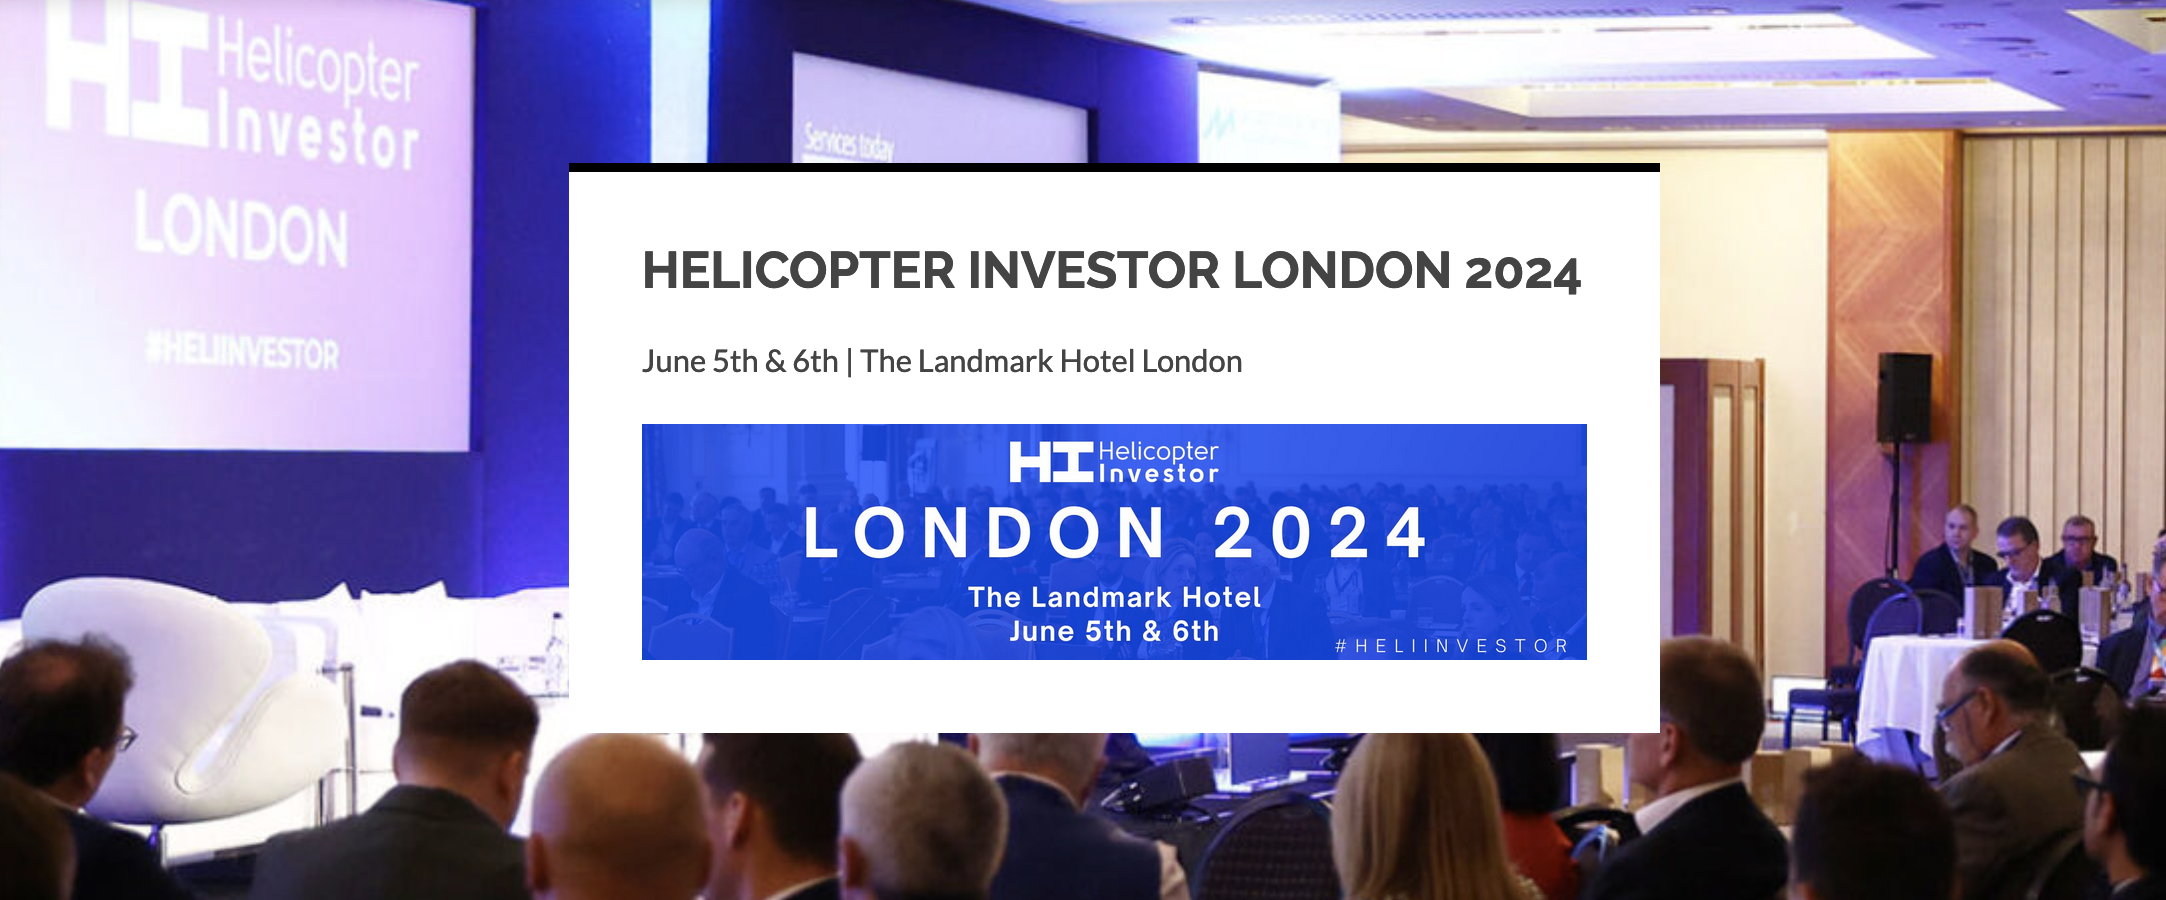 Join us at Helicopter Investor London 2024